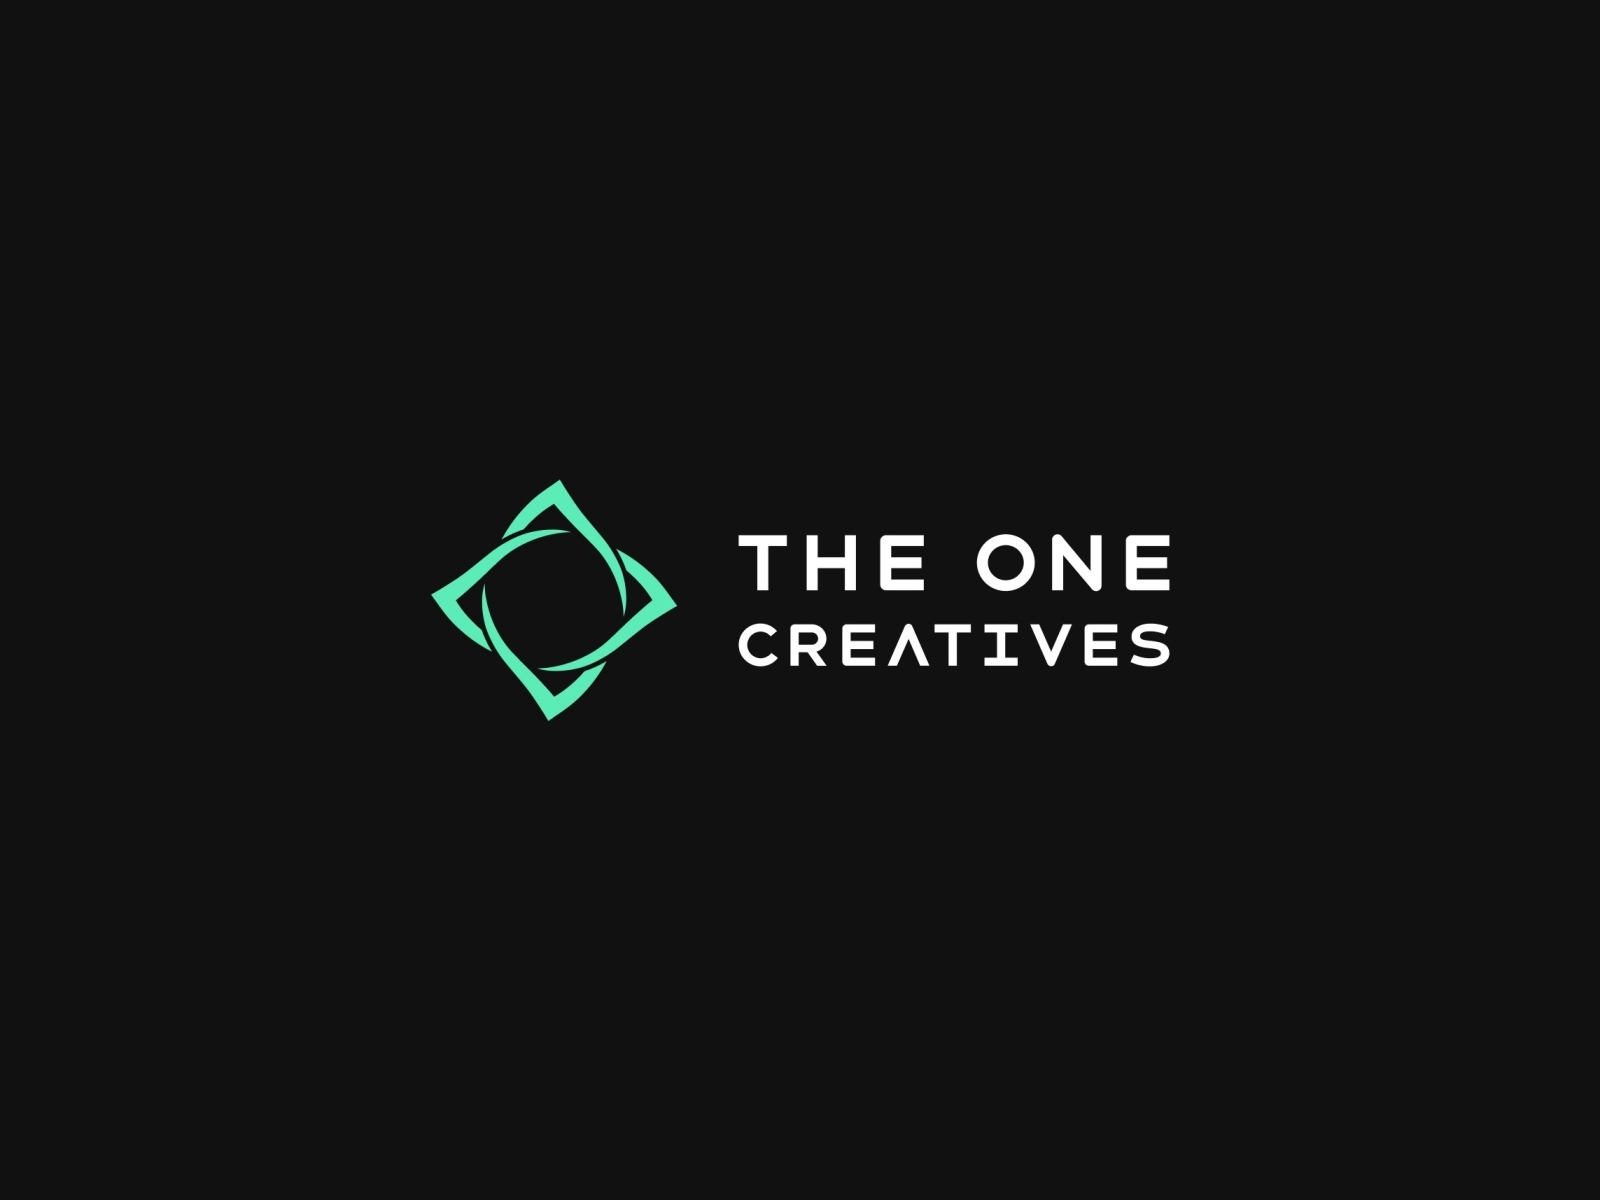 Logo/ Brand Identity - The One Creatives by The One Creatives on Dribbble